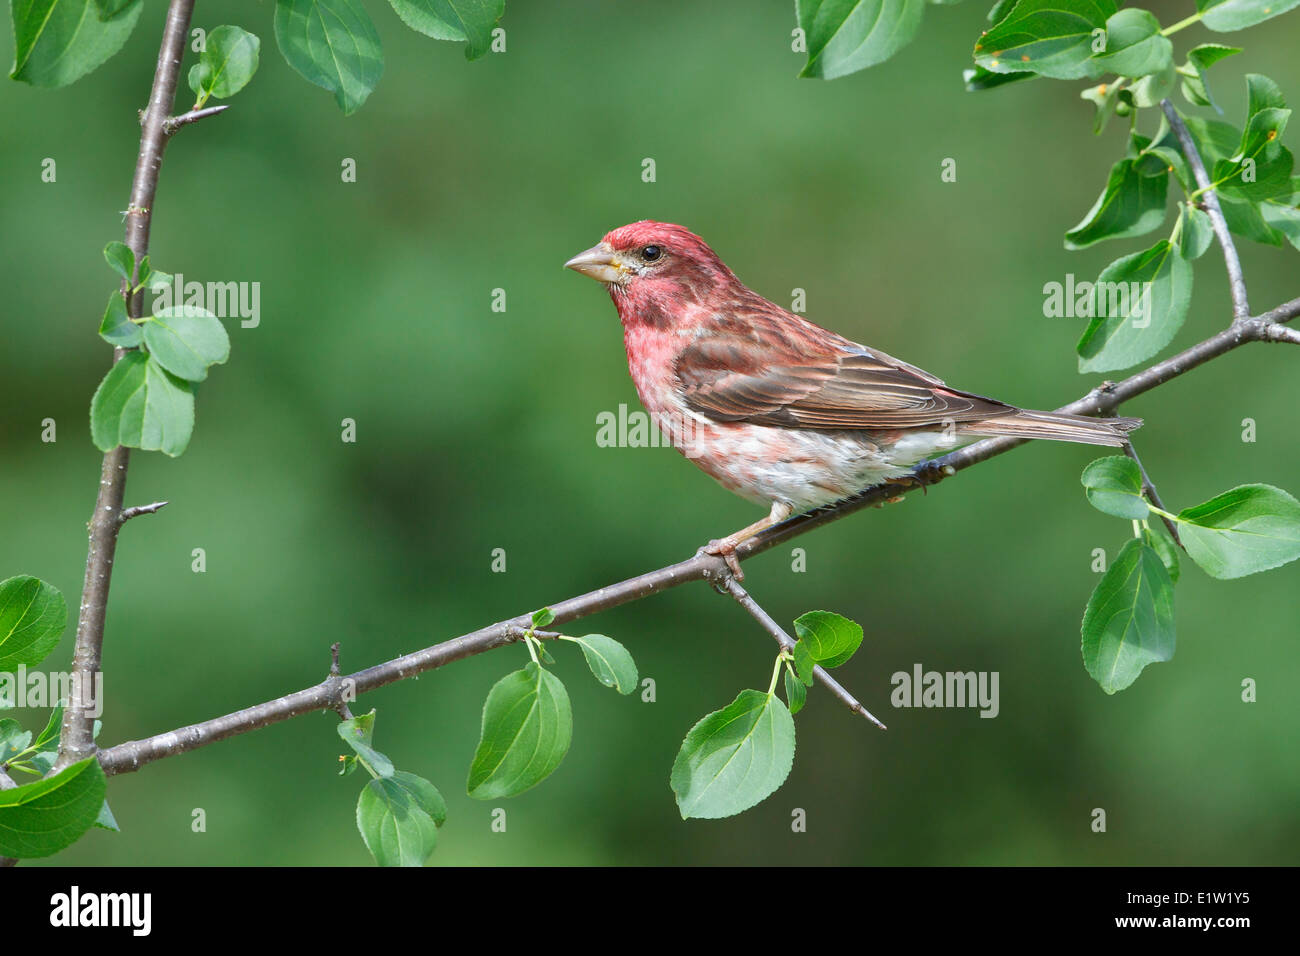 Purple Finch, Haemorhous purpureus, perched on a branch in Eastern Ontario, Canada. Stock Photo